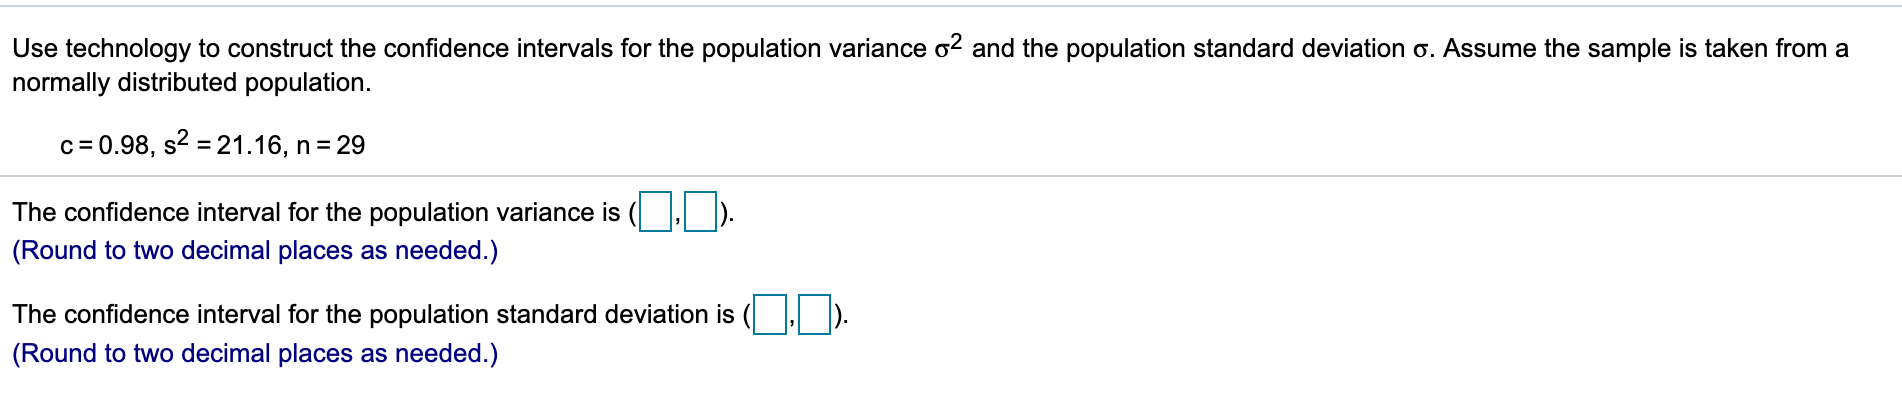 Use technology to construct the confidence intervals for the population variance o2 and the population standard deviation o. Assume the sample is taken from a
normally distributed population.
c 0.98, s2 21.16, n 29
The confidence interval for the population variance is
(Round to two decimal places as needed.)
The confidence interval for the population standard deviation is
(Round to two decimal places as needed.)
